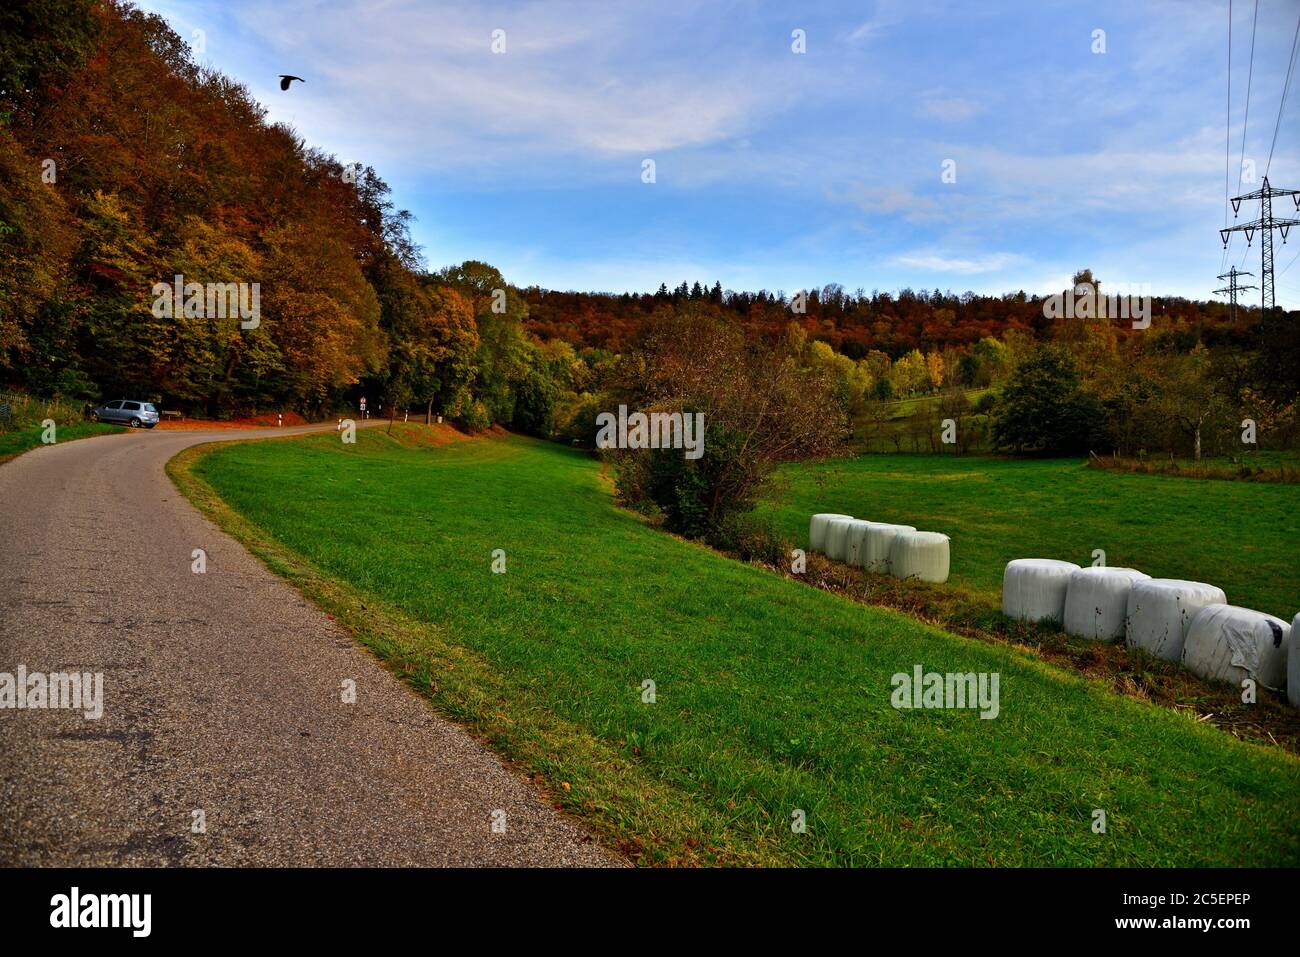 Forest Trees with Colorful Autumn Leaves, Grass Fields, Bales of Straw in White Plastic Sheet and Masts at an Autumn Evening, Swabian Alb, Germany, EU Stock Photo